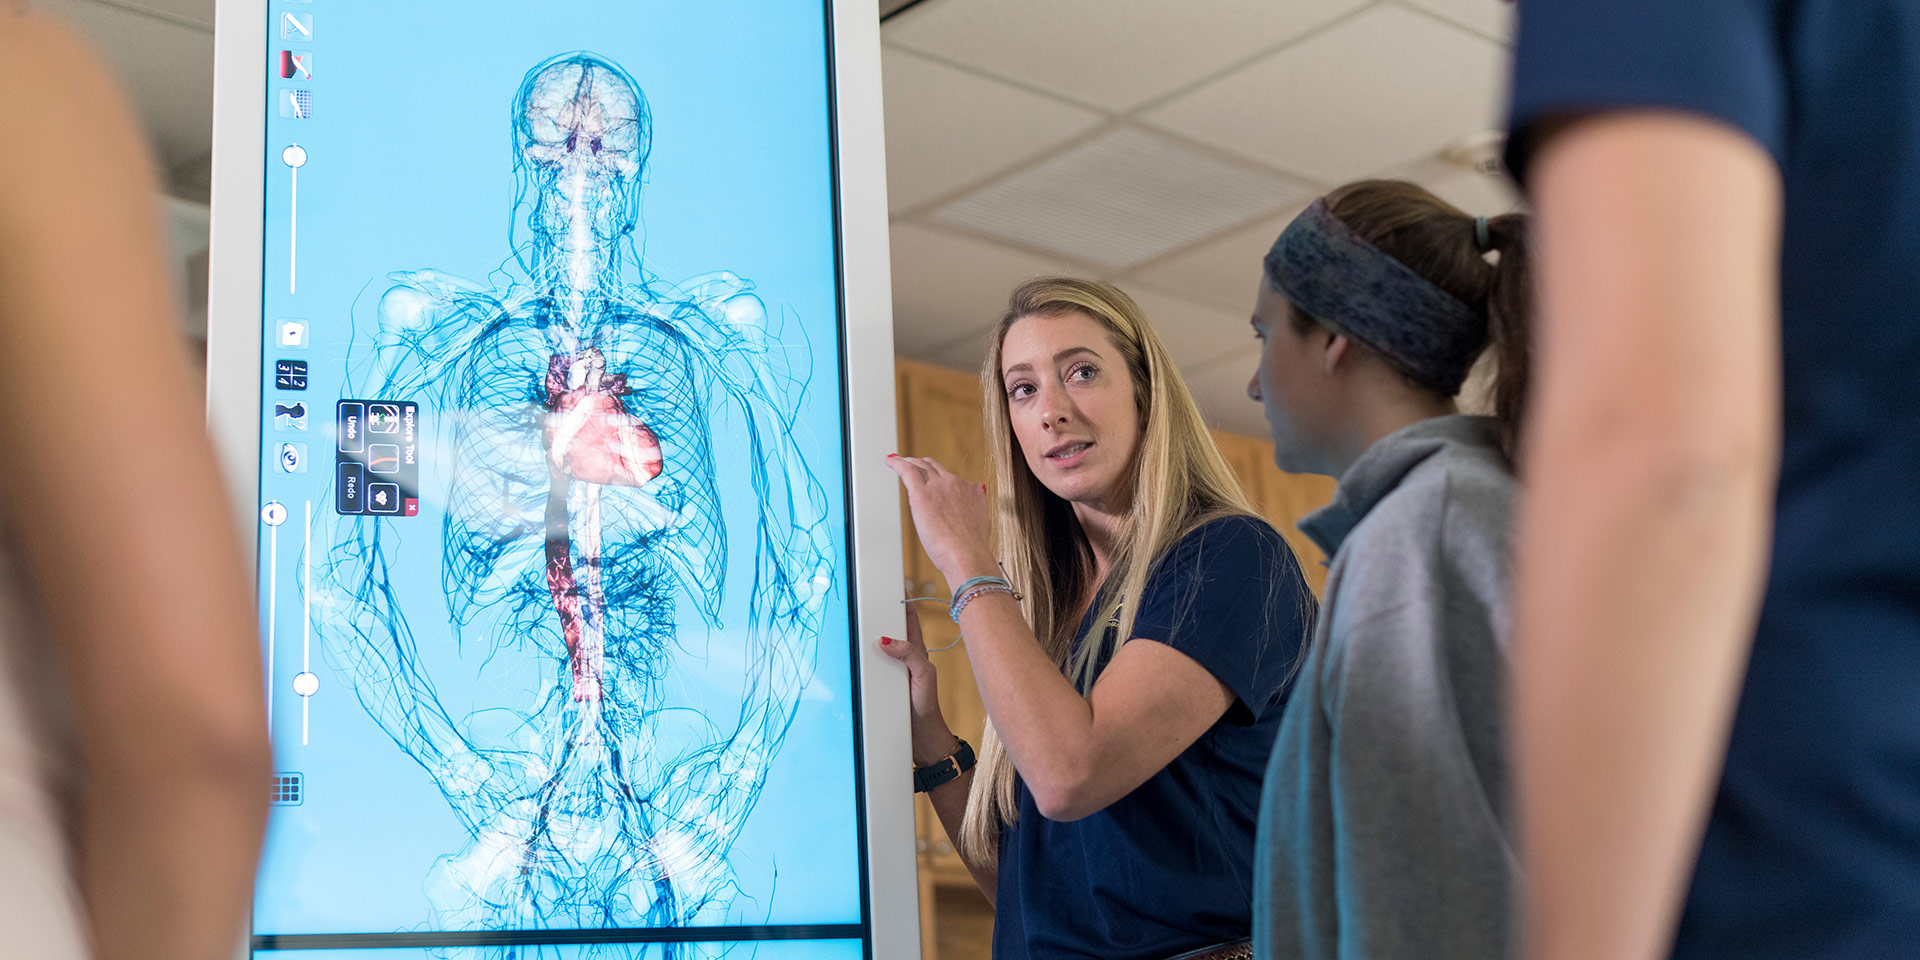 students examine a life-size screen depicting the human nervous system.